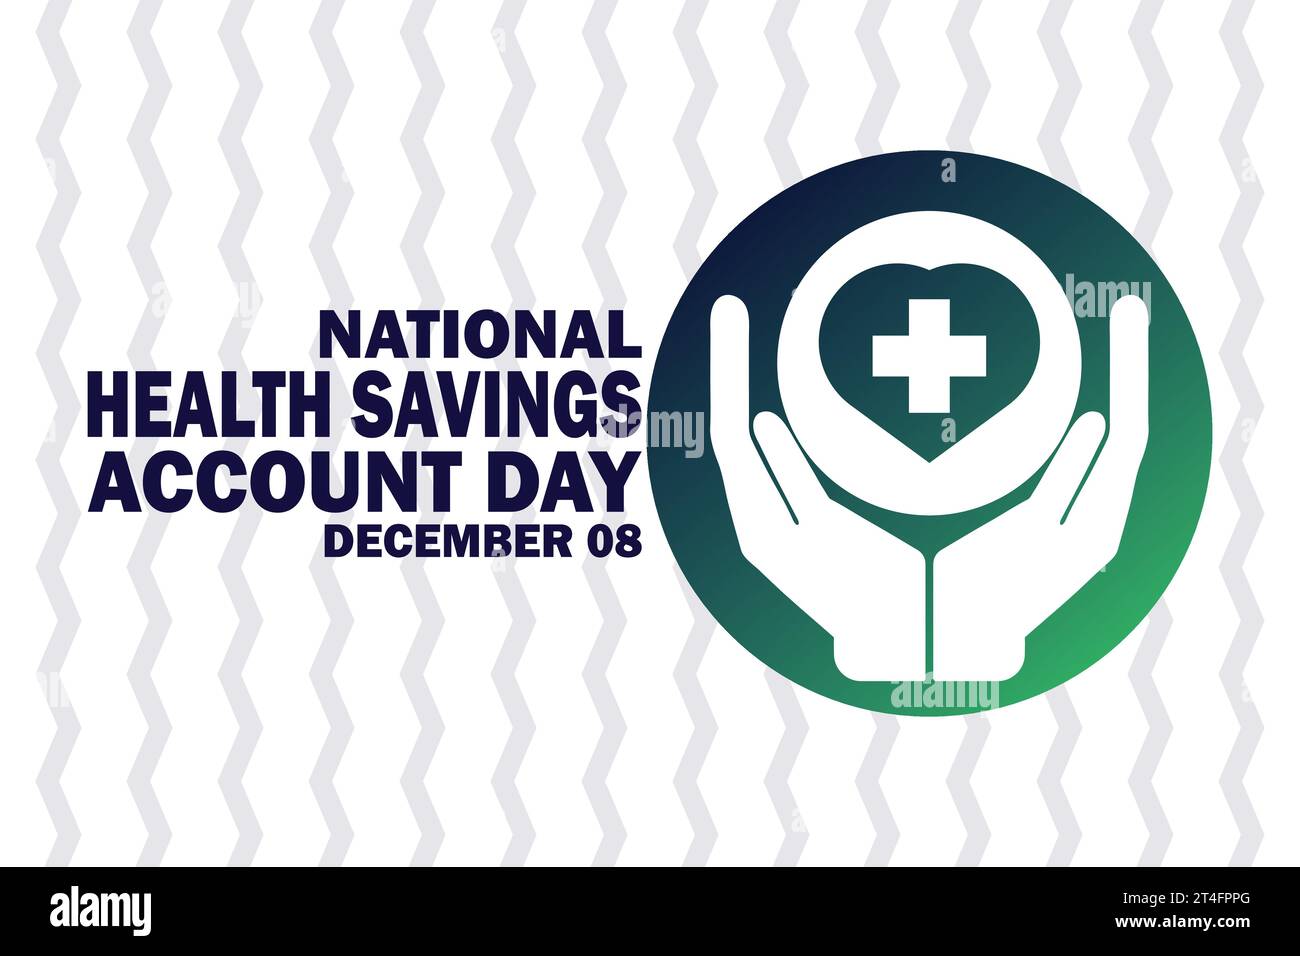 National Health Savings Account Day. December 08. Holiday concept. Template for background, banner, card, poster with text inscription. Vector Stock Vector